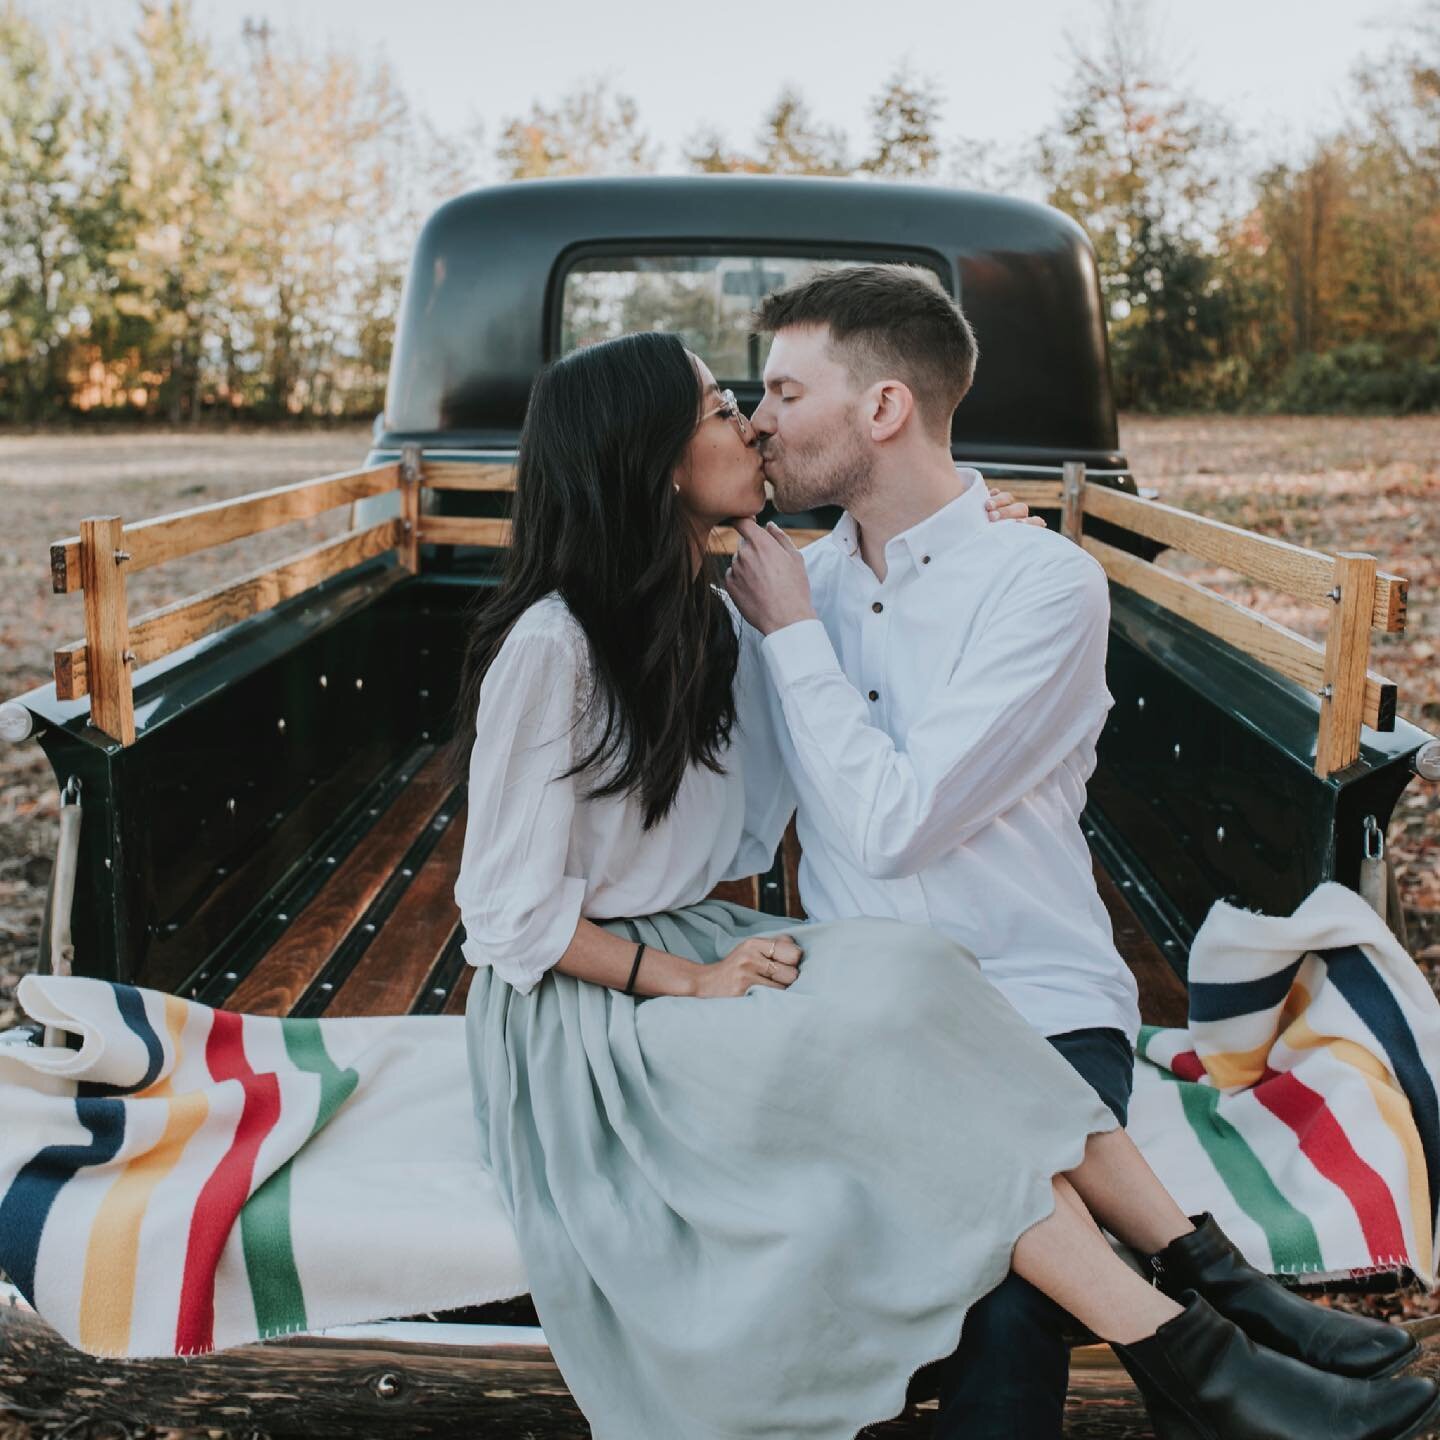 Cozy truck sessions gives me all of the feels 💕
⠀⠀⠀⠀⠀⠀⠀⠀⠀
⁣
.⁣
.⁣
.⁣
.⁣
.⁣
#bride #bridetobe #couple #couplegoals #couplephotography #couplequotes #couples #couplesgoals #coupleshoot #cute #engaged #engagementphotographer #engagementphotography #eng